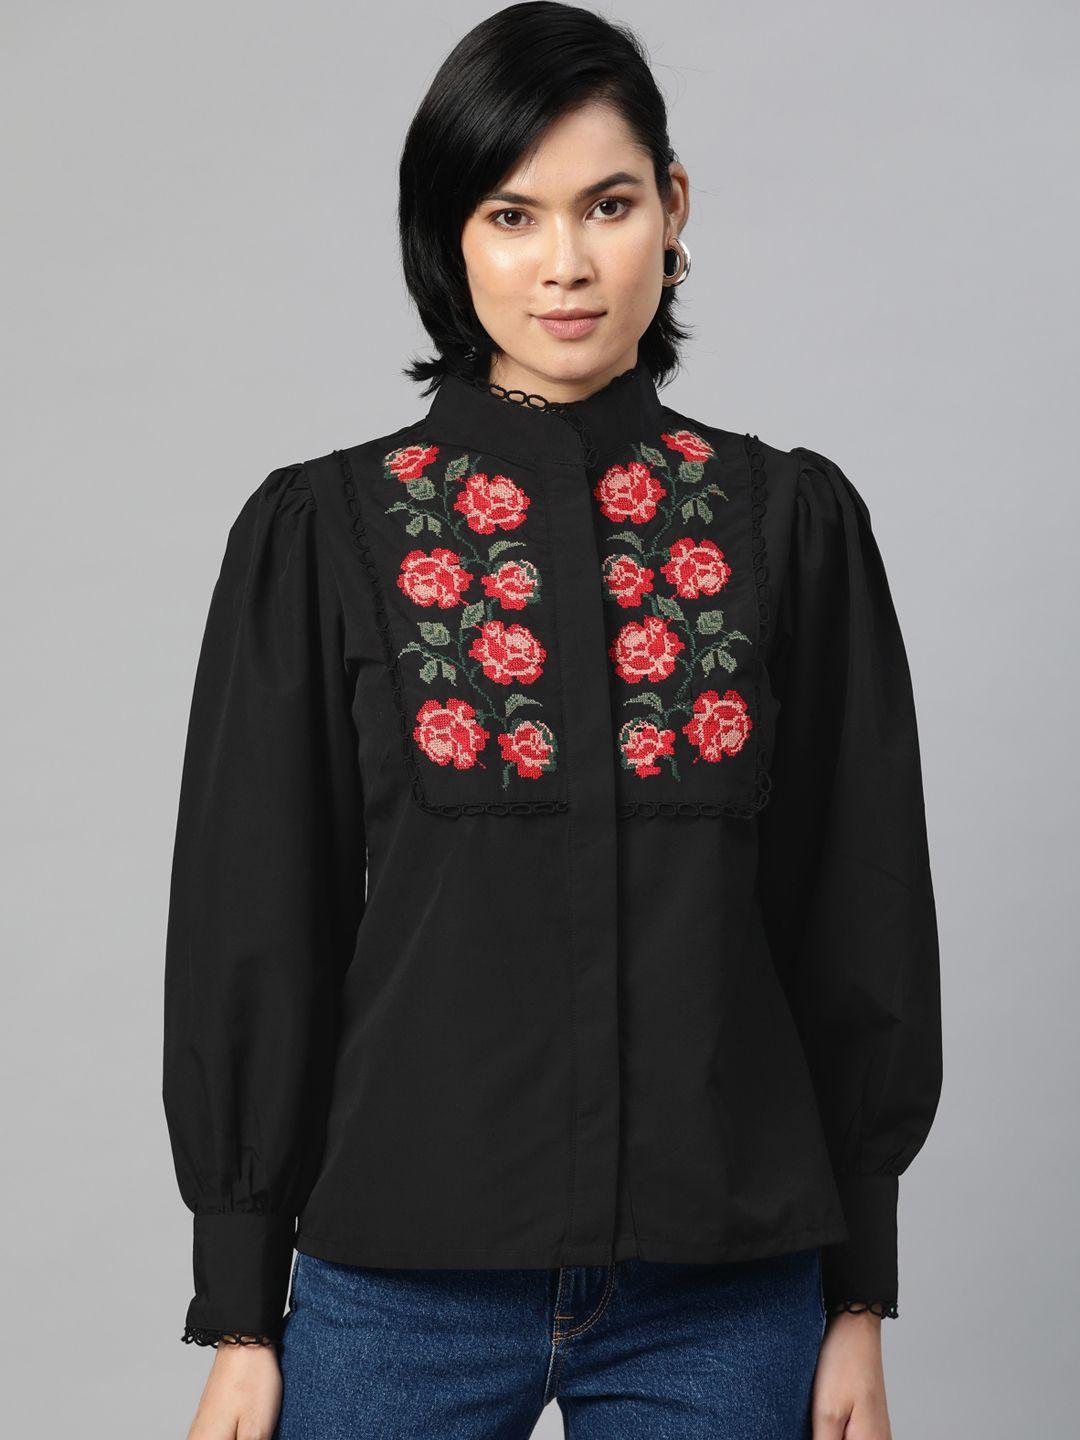 pluss black & red floral embroidered mandarin collar shirt style top